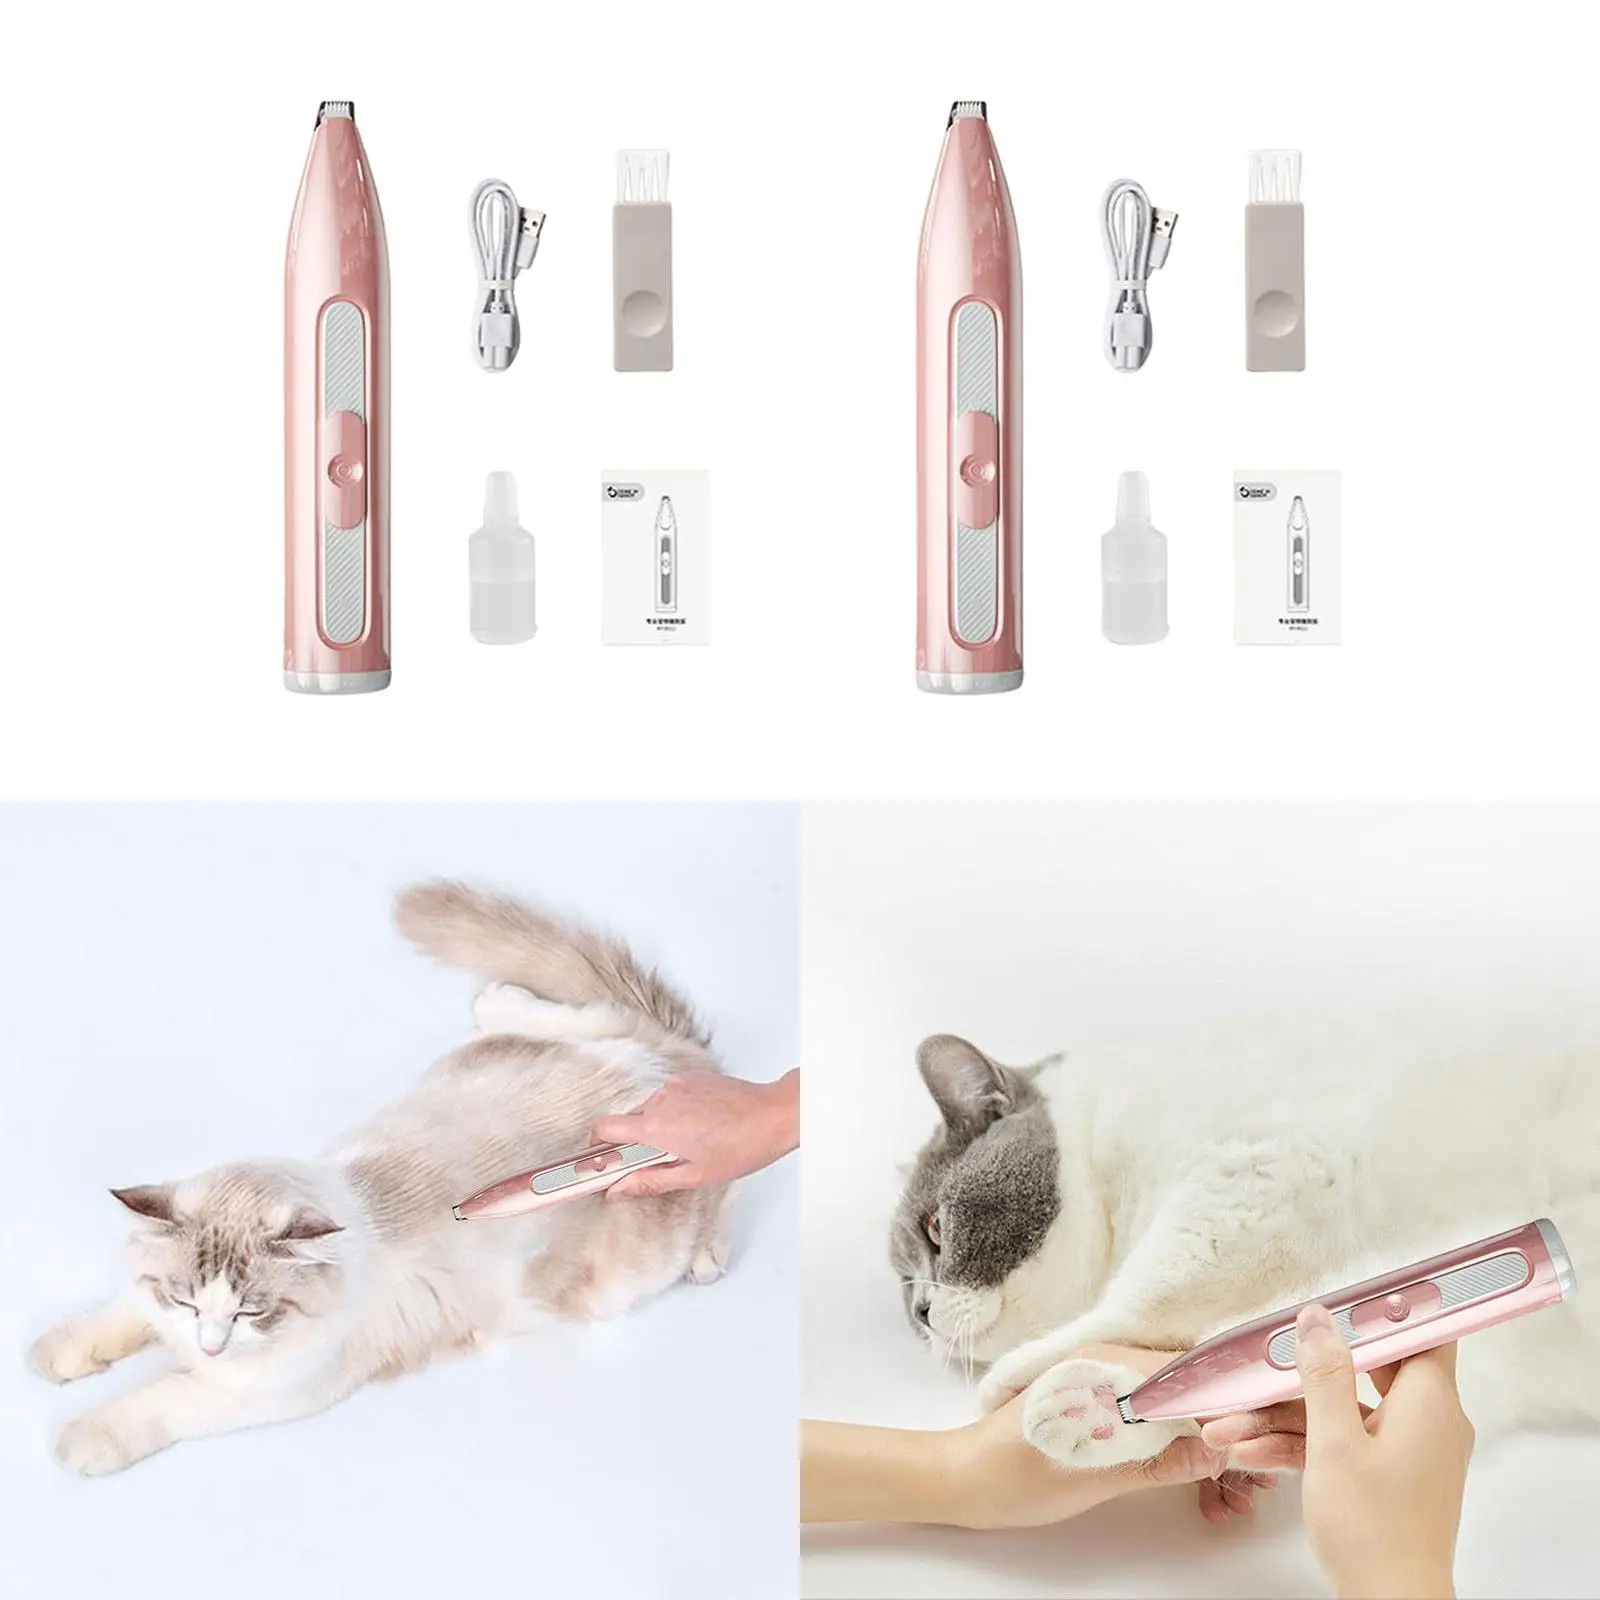 Portable Pet Nail Hair Trimmer Dog Hair Clippers Silent Kitten Cordless Puppy for Small Animals Toes Paw Rump Trimming Shaving